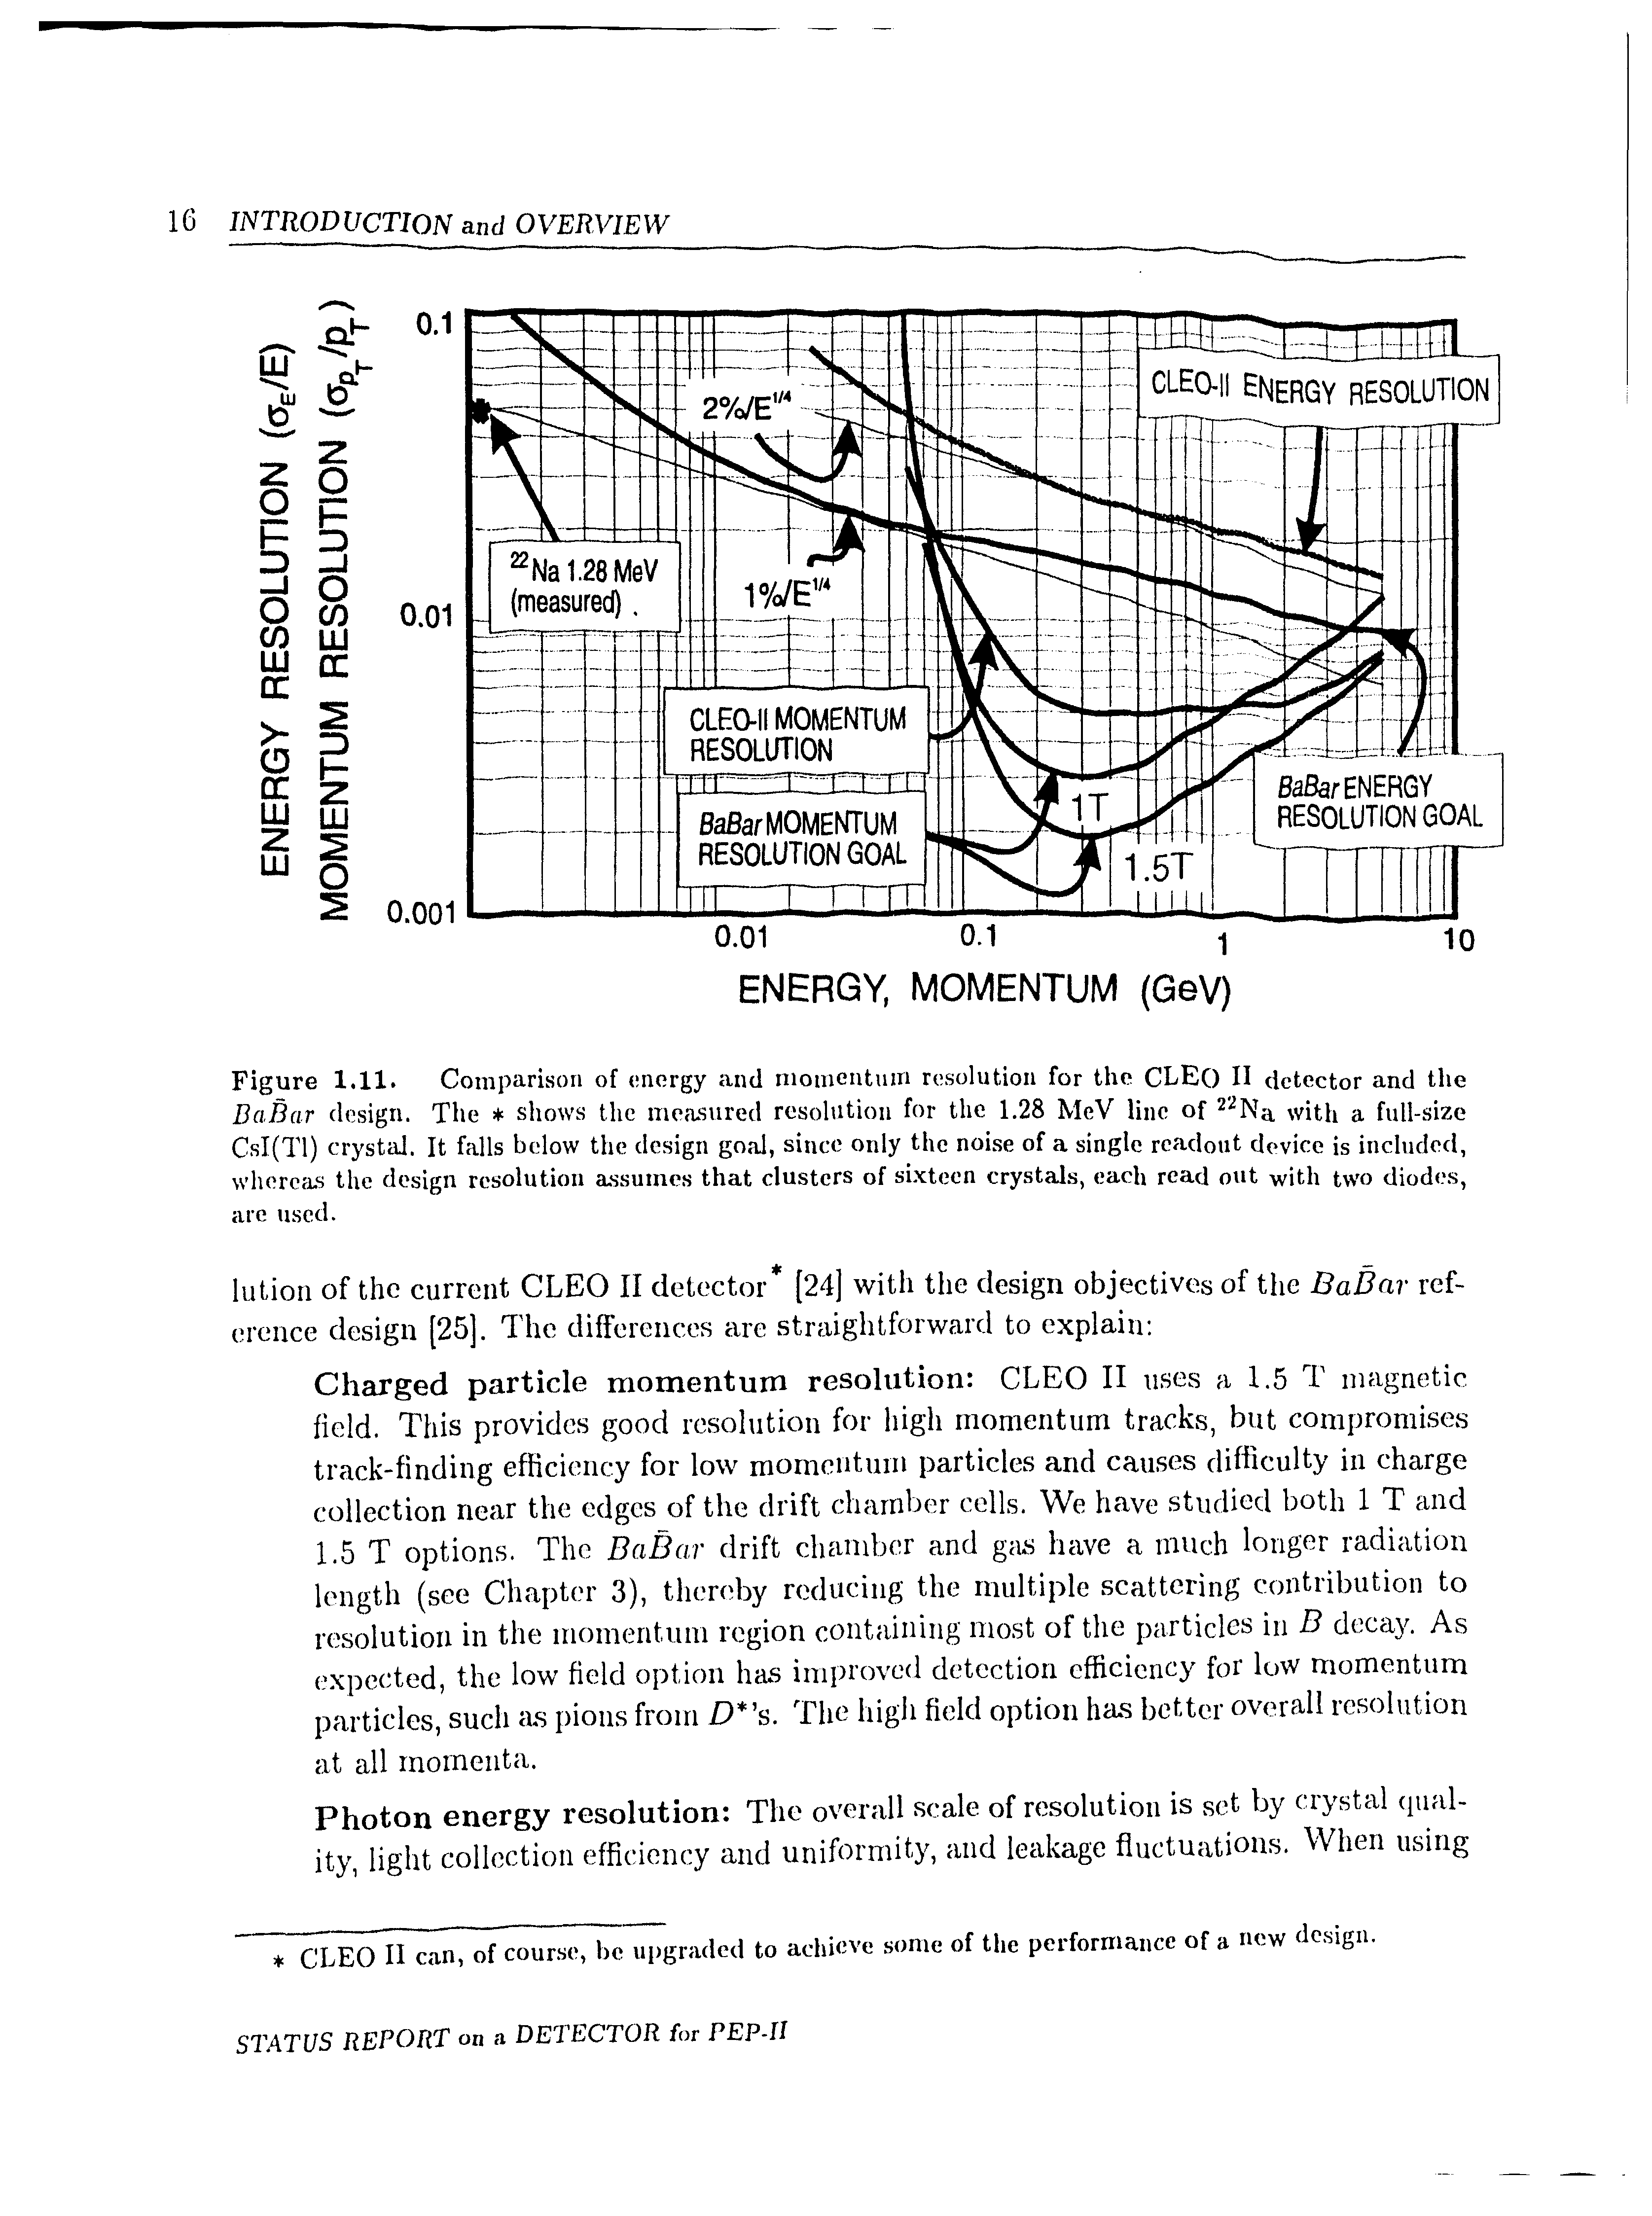 Figure 1.11. Comparison of energy and momentum resolution for the CLEQ II detector and the DaBar design. Tlie shows the measured resolution for the 1.28 MeV line of with a full-size CsI(Tl) crystiU. It falls below the design goal, since only the noise of a single readout device is included, whereas the design resolution assumes that clusters of sixteen crystals, each read out with two diodes, are used.